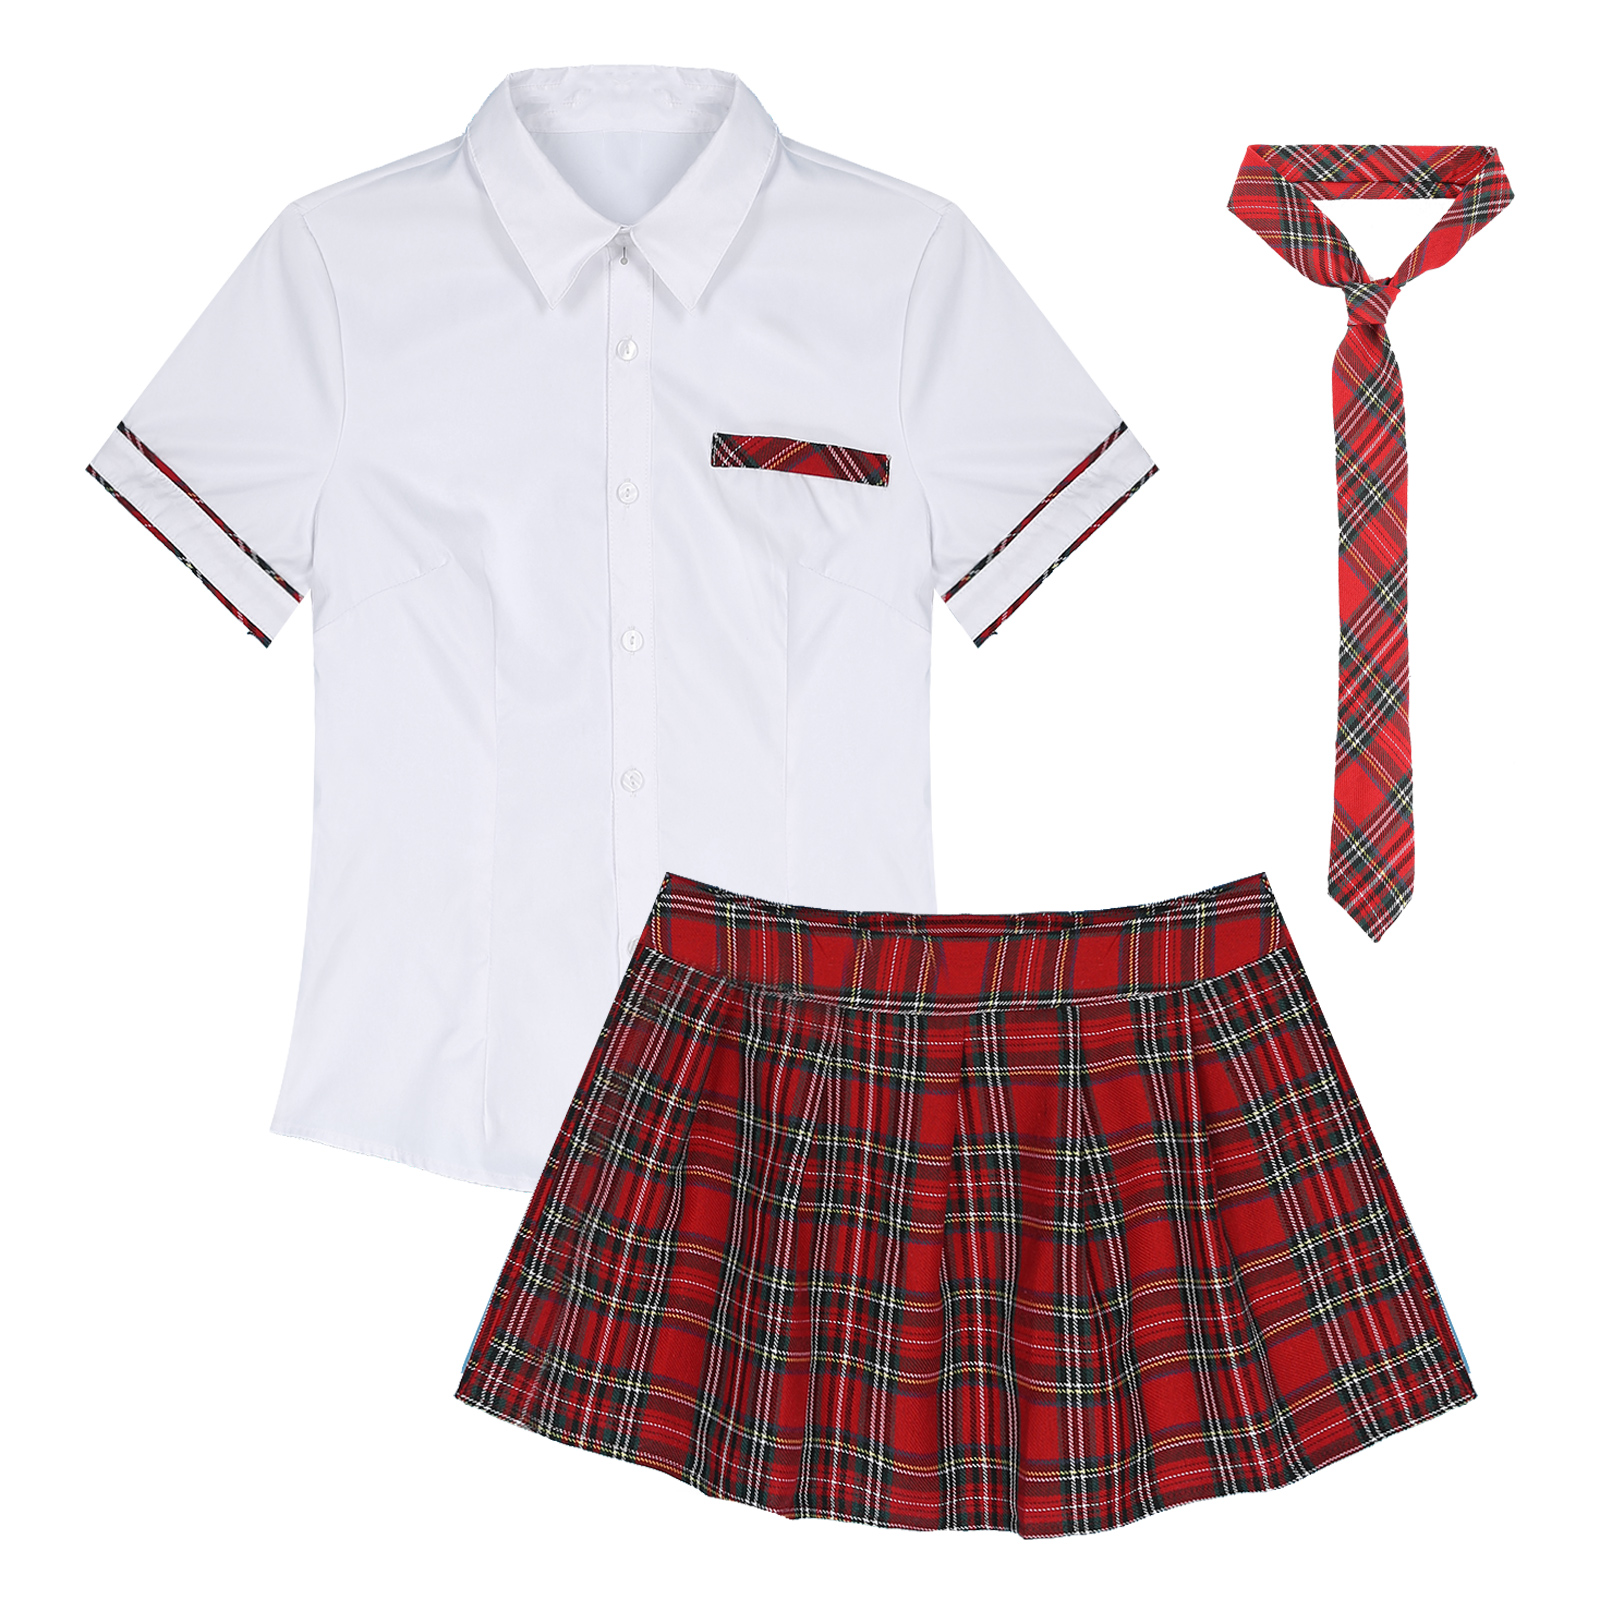 Womens Schoolgirl Cosplay Costume Halloween Party Outfit School Uniform Short Sleeve Shirt with Plaid Skirt And Tie Set